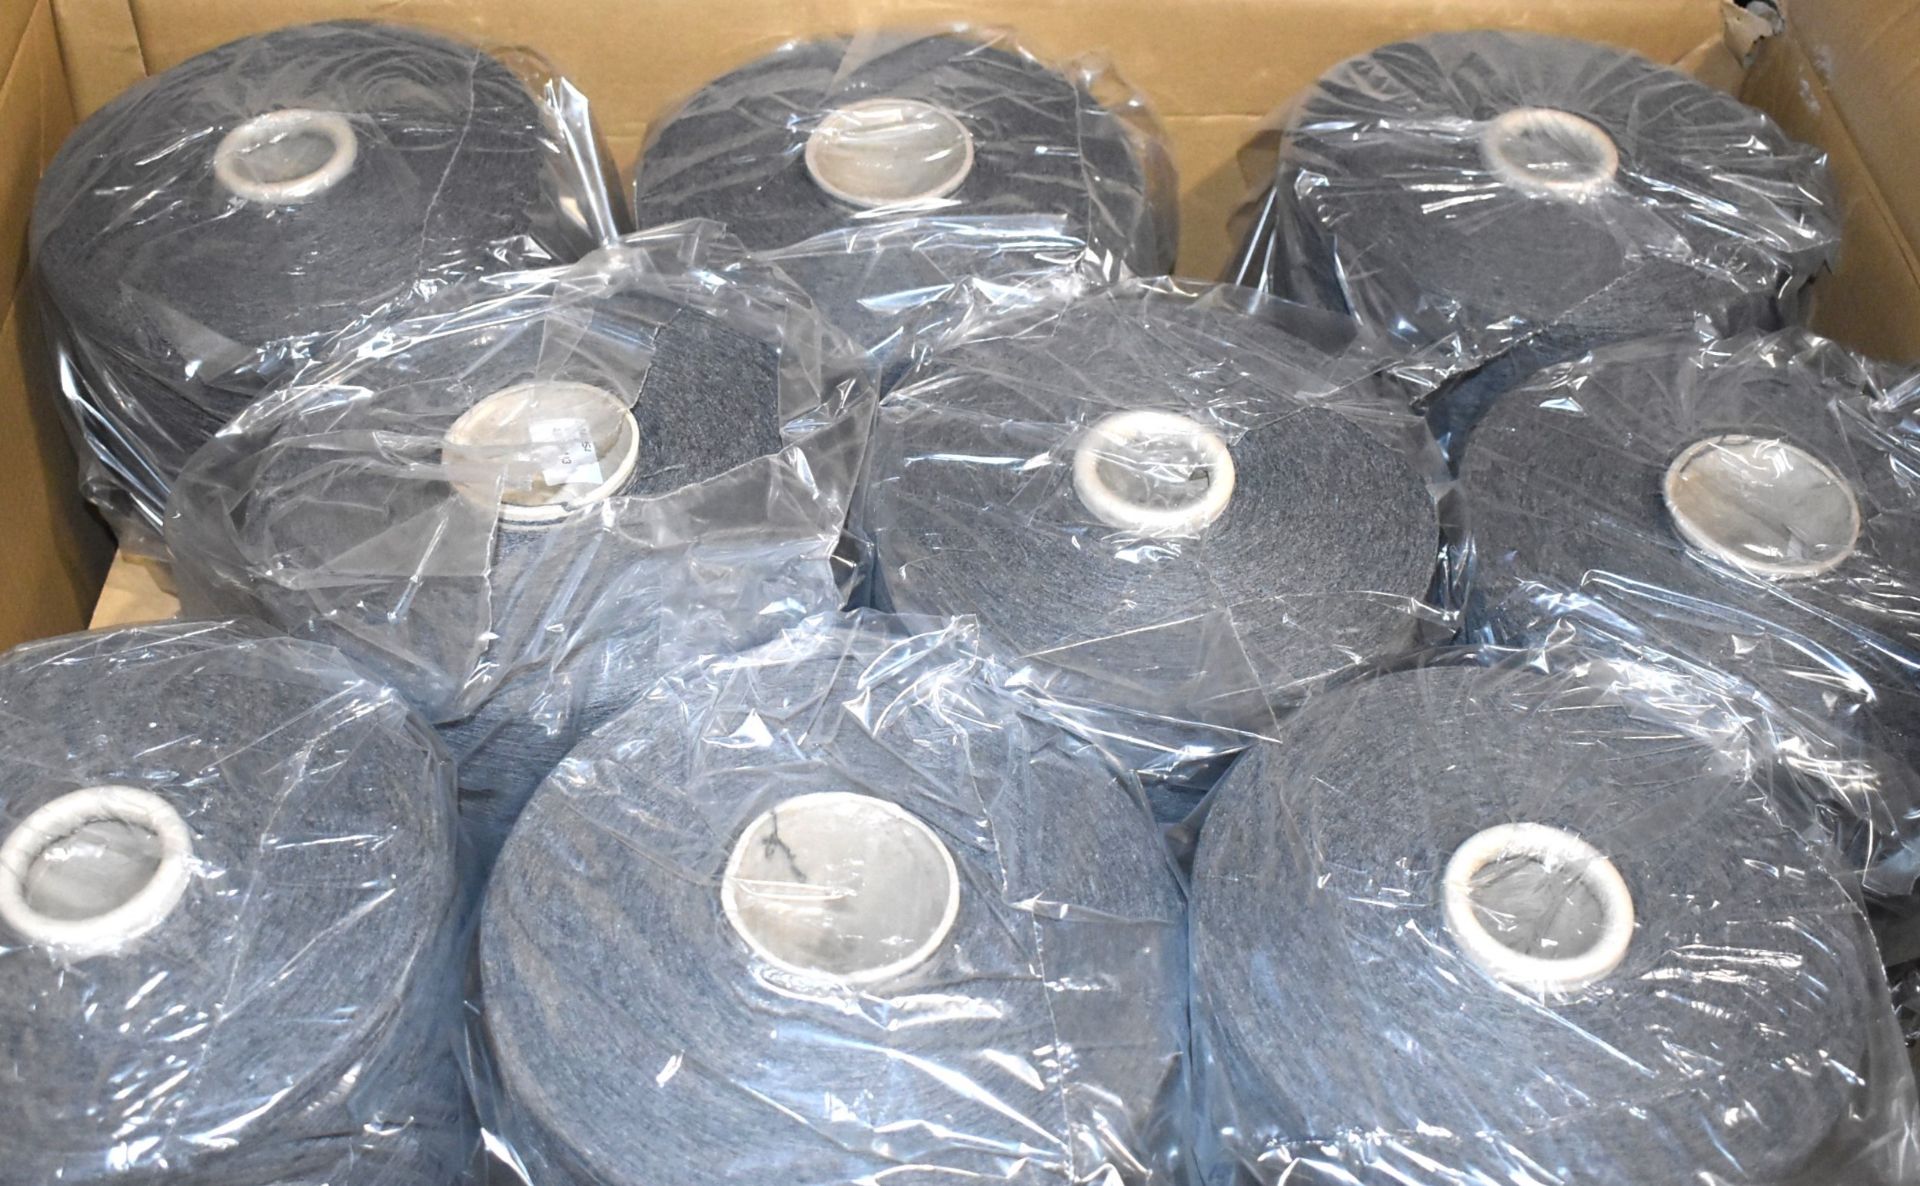 10 x Cones of 1/13 MicroCotton Knitting Yarn - Mid Grey - Approx Weight: 2,500g - New Stock ABL Yarn - Image 2 of 17